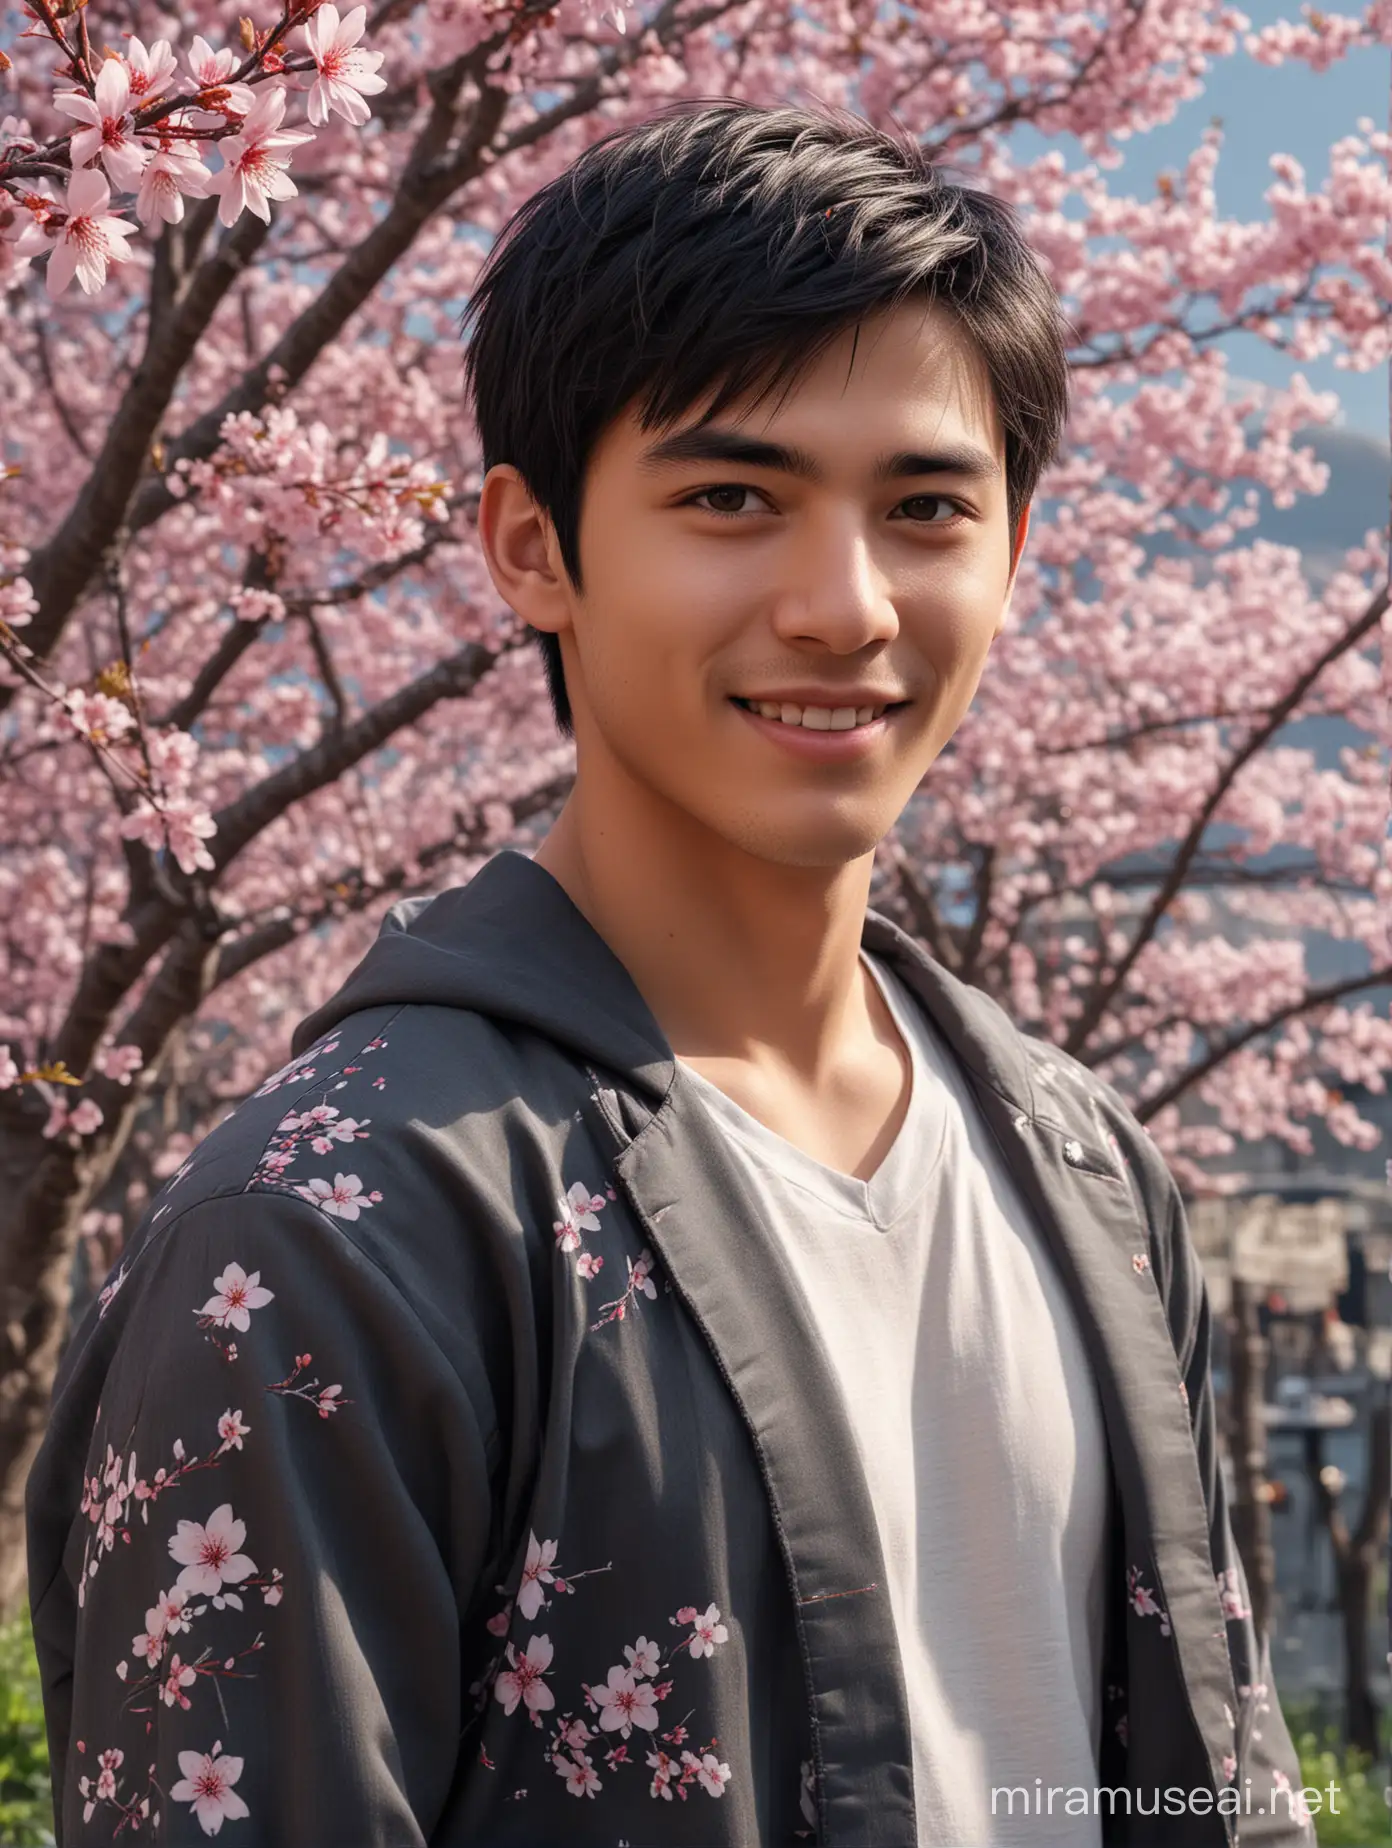 Masterpiece, full body, upper, very detailed, real photo a very handsome man 18 yo, neat short black hair, smile ekpressions, standing facing the camera under the sakura flower at morning, 32K ultraHD resolution, HDR, 800mm lens, realistic , hyperrealistic, photography, professional photography, deep photography, ultra HD, very high quality, best quality, mid quality, HDR photo, focus photo, deep focus, very detailed, original photo, original photo, ultra sharp, nature photo, masterpiece, award winning, shot with hasselblad x2d